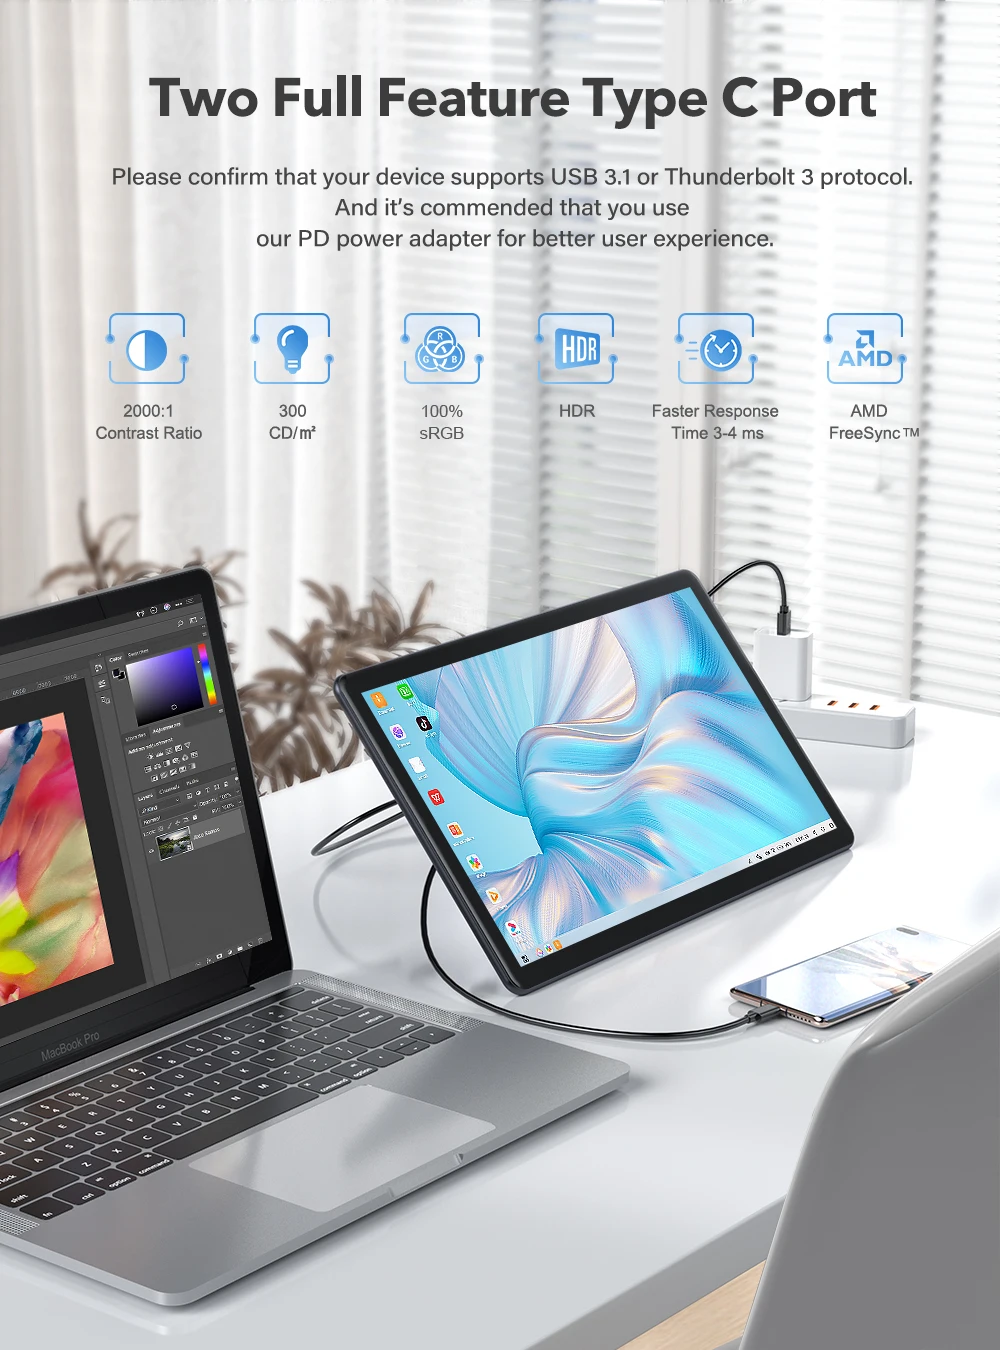 【New】UPERFECT TouchScreen 1080P Portable Monitor 15.6inch LCD 300cd/m² brightness Sencond Display for  Samsung DEX Huawei EMUI